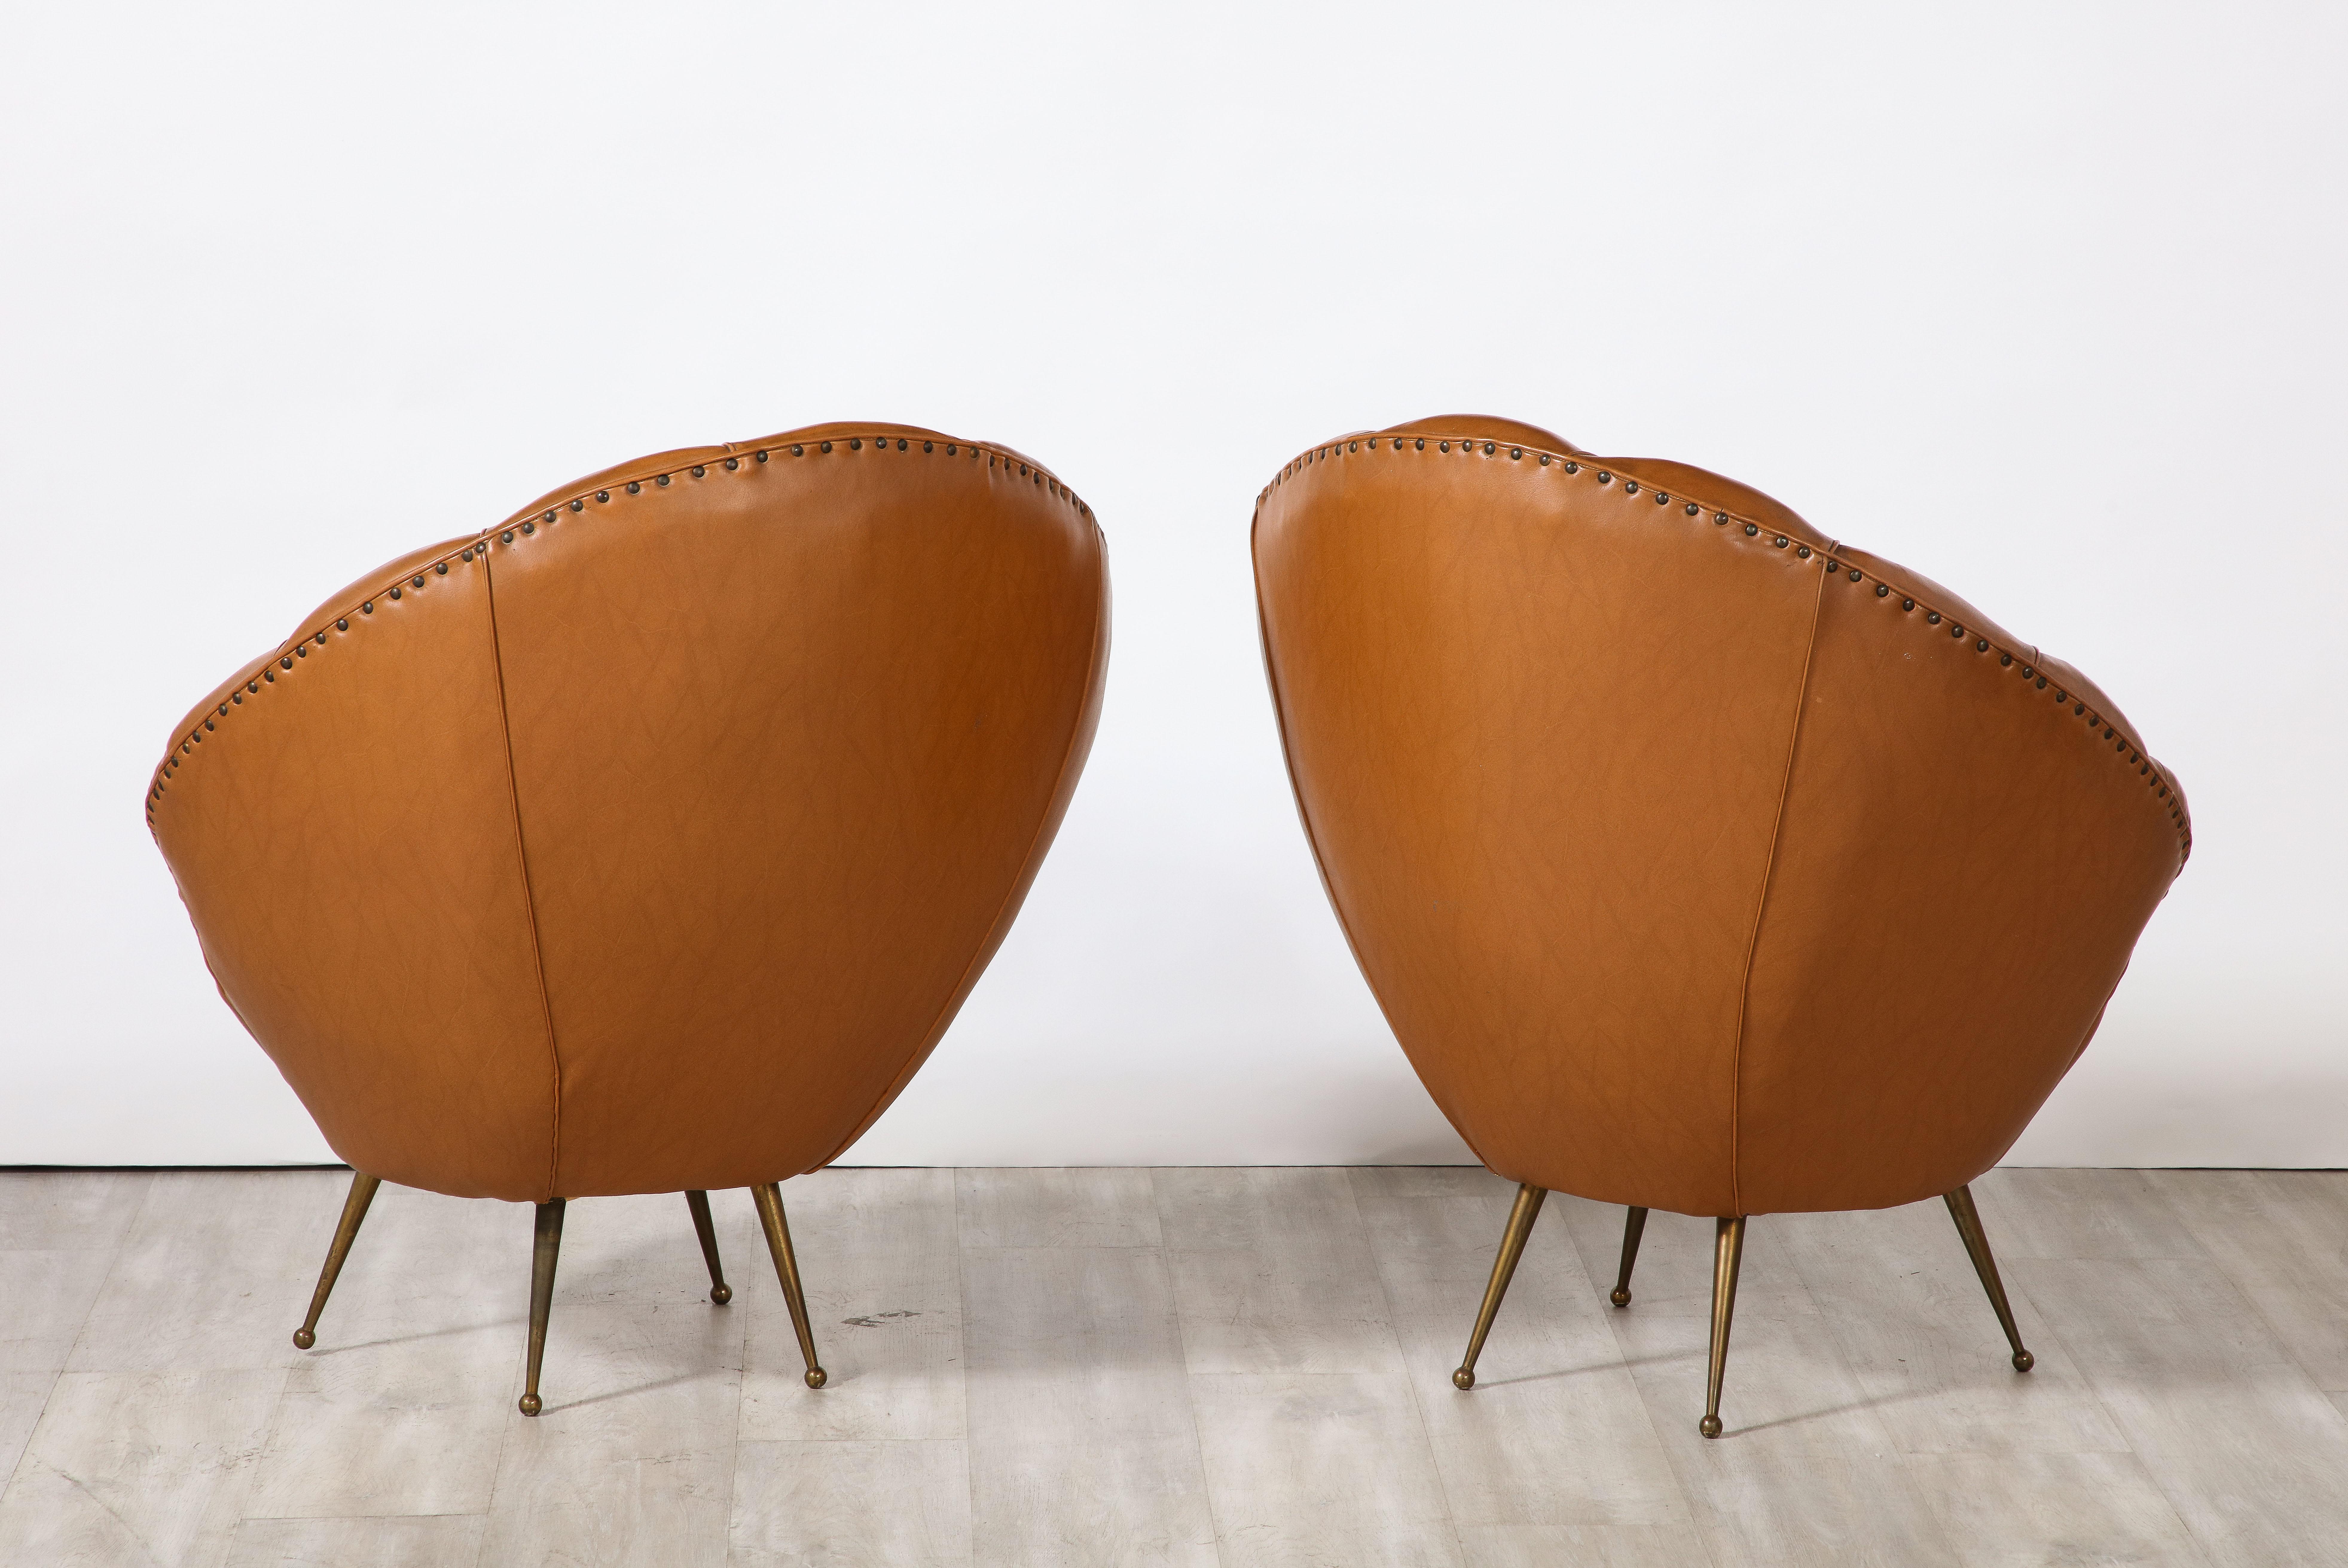 Pair of Italian Modernist Leather Scalloped Lounge Chairs, Circa 1950  For Sale 4